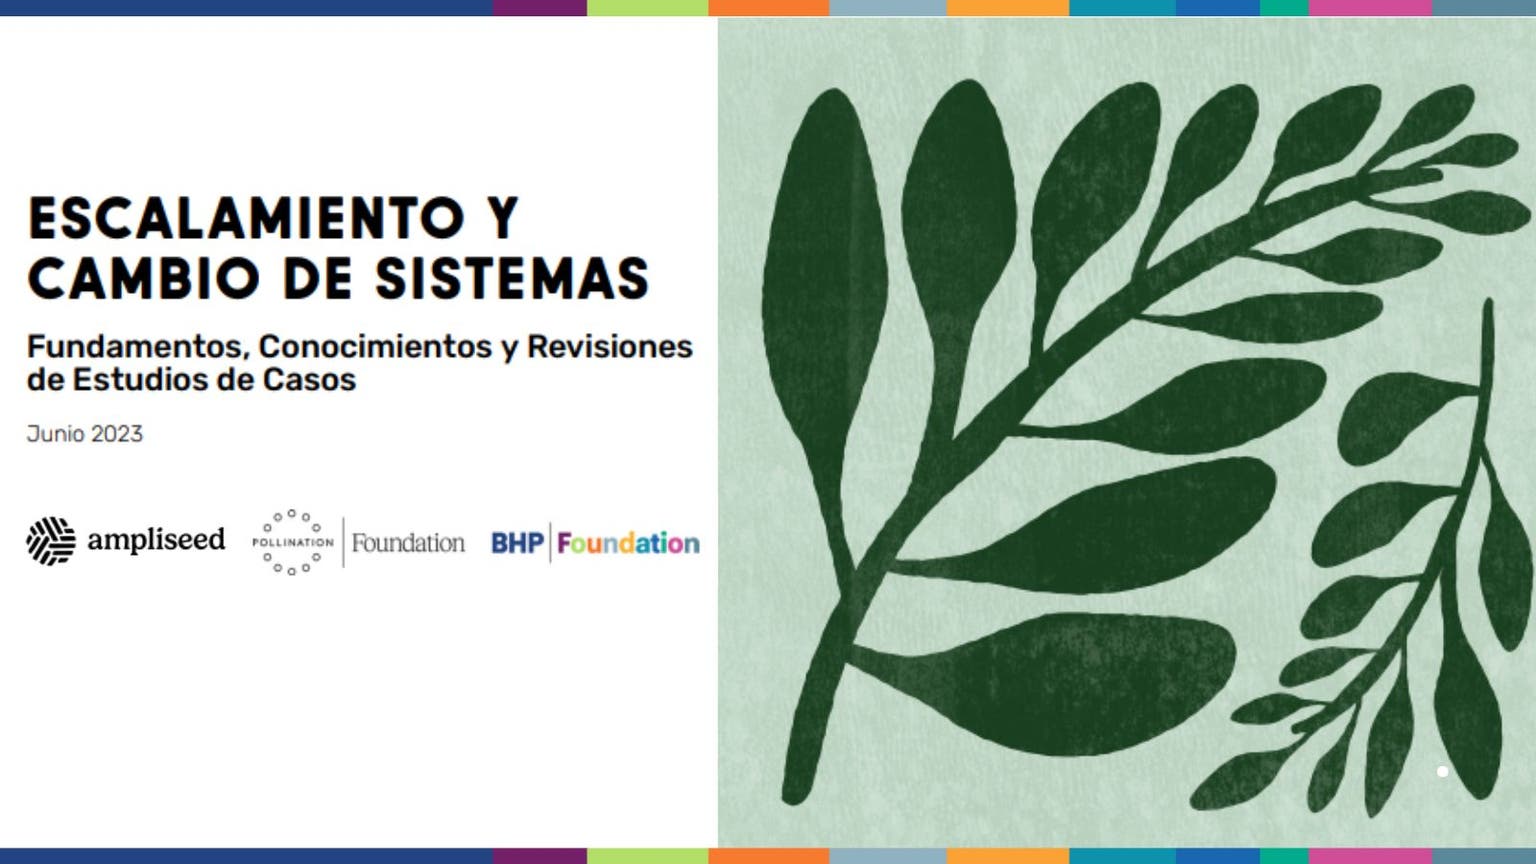 BHP_Foundation_Ampliseed_Scaling_and_Systems_Change_report_Spanish.jpg